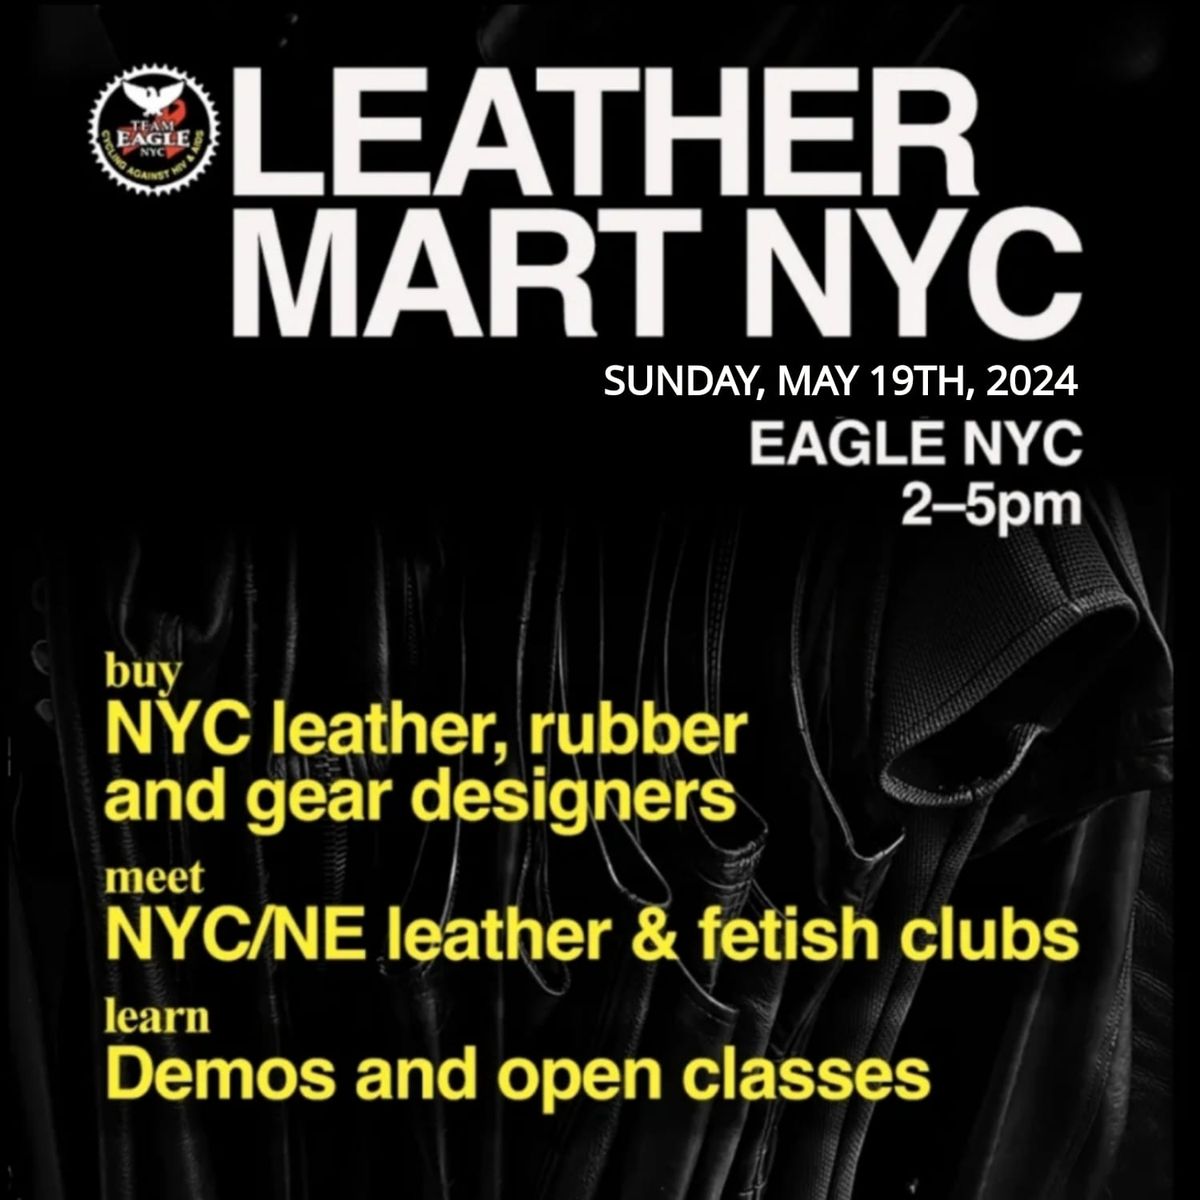 LEATHER MART NYC